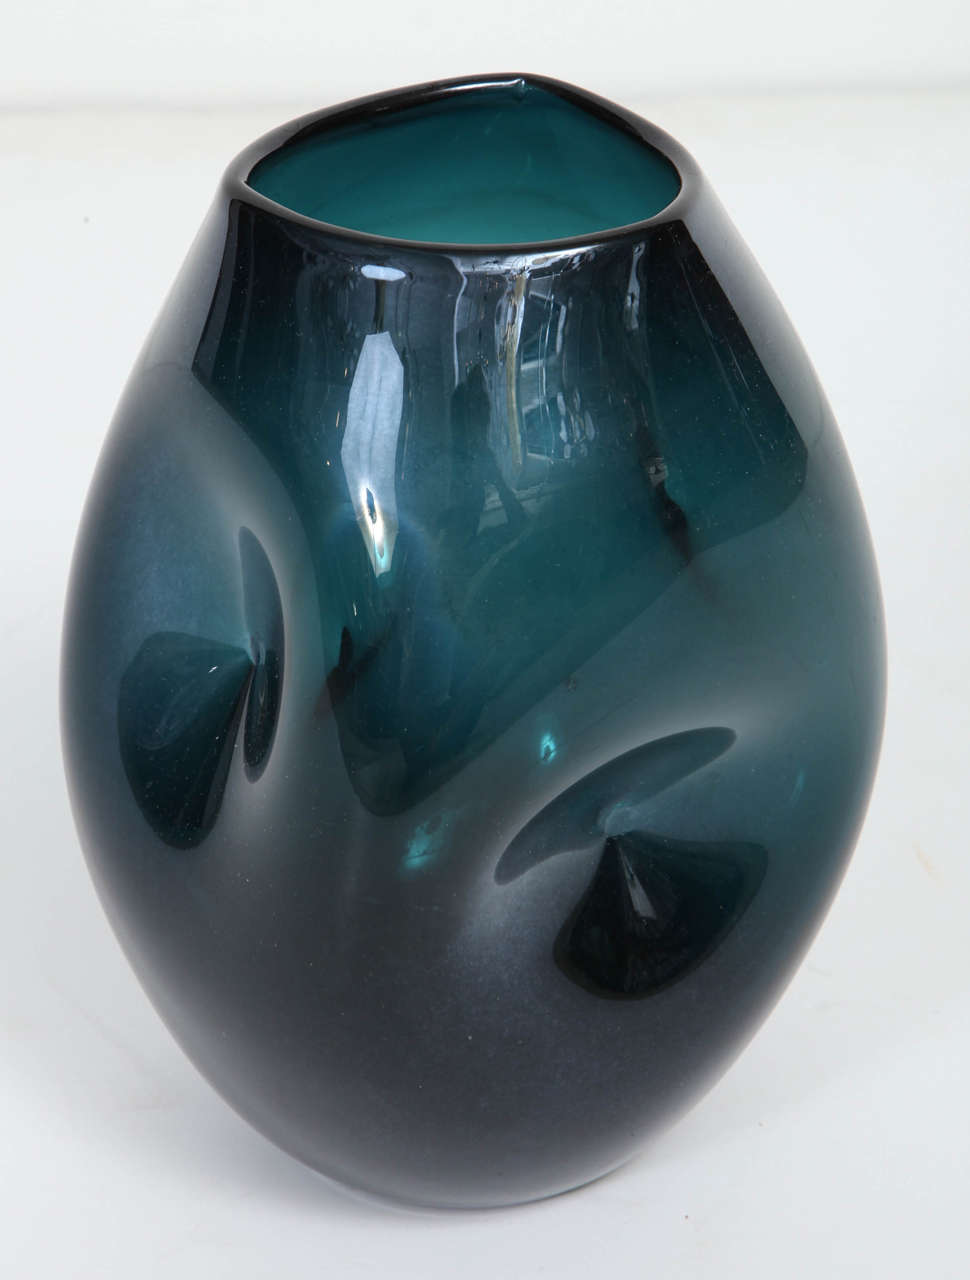 Sculptural jade green smoke glass vase with dimpled surface.  

Italy, circa 1960.

No visible makers mark.